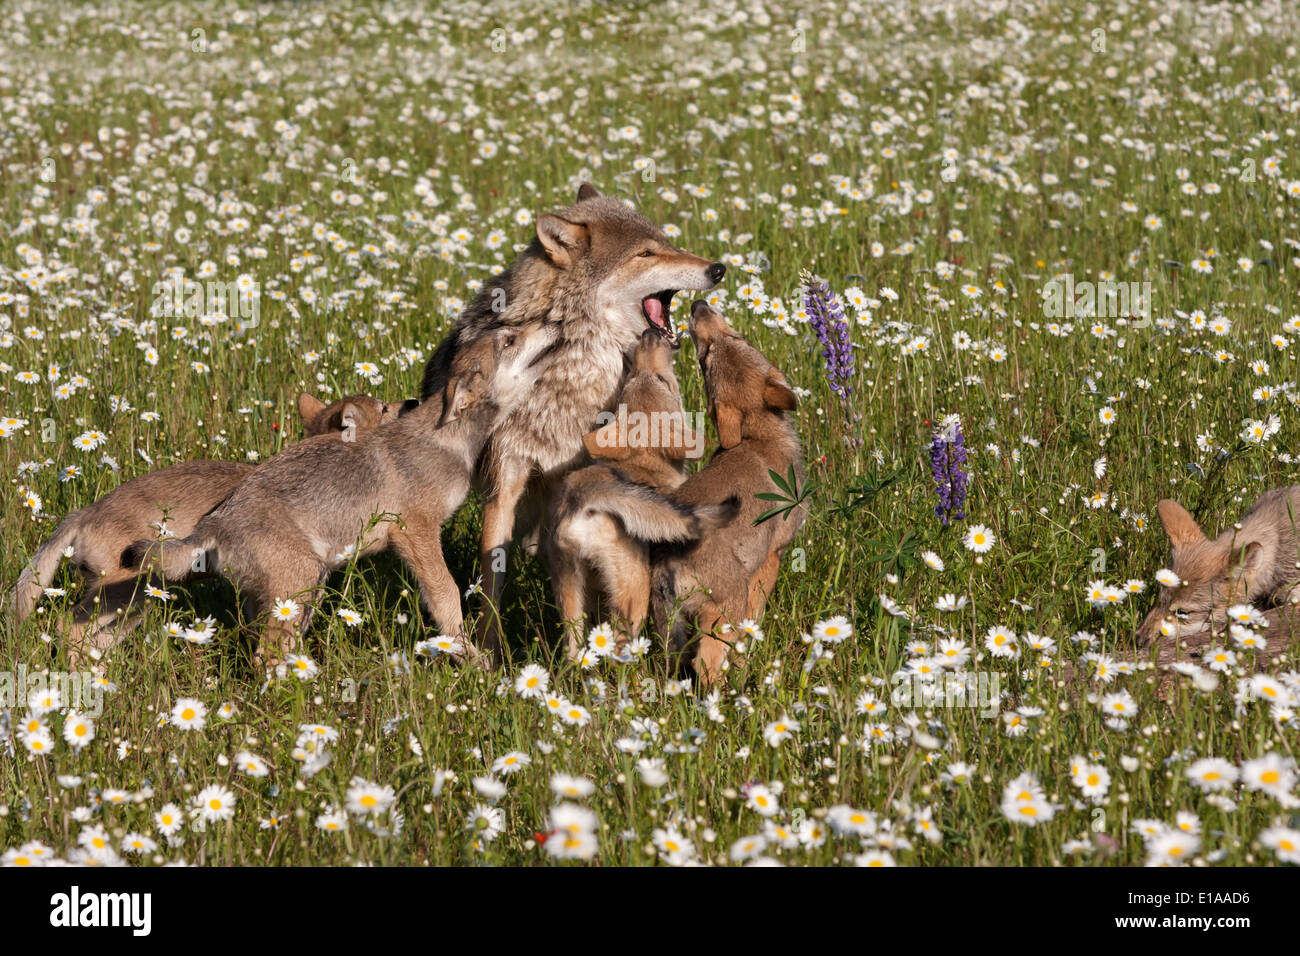 Playful Wolf Puppies Jumping on Momma Wolf in Wildflower Field Stock Photo